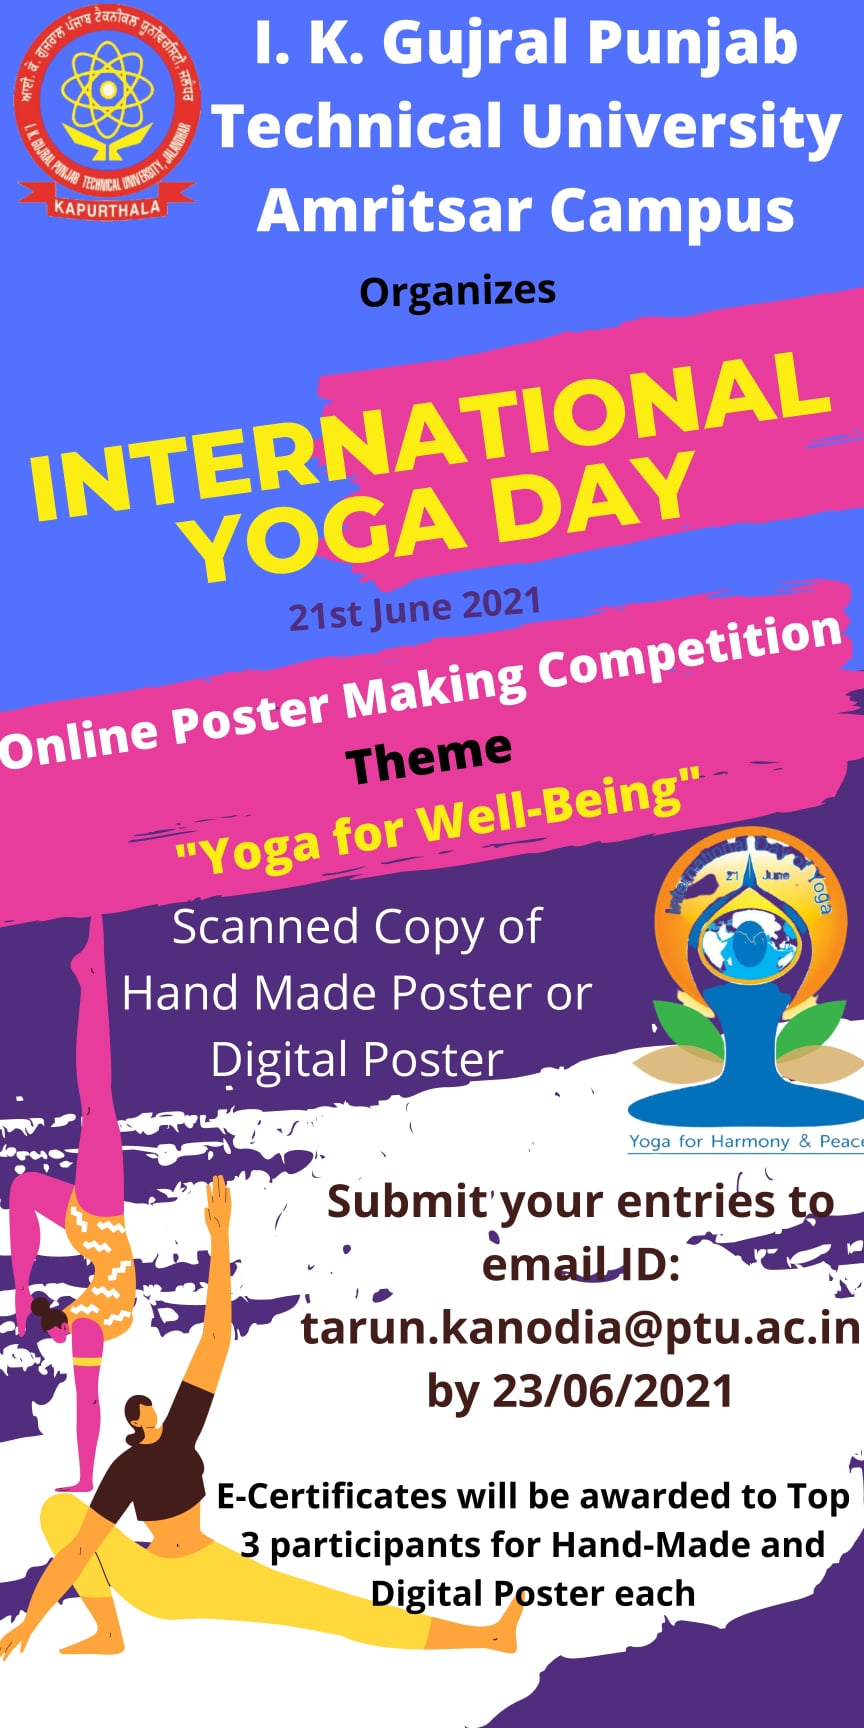 NSS Unit of IKGPTU Amritsar Campus organized Online Poster making Competition on on 21st June 2021 celebrating International Yoga Day with students of IKGPTU Amritsar Campus